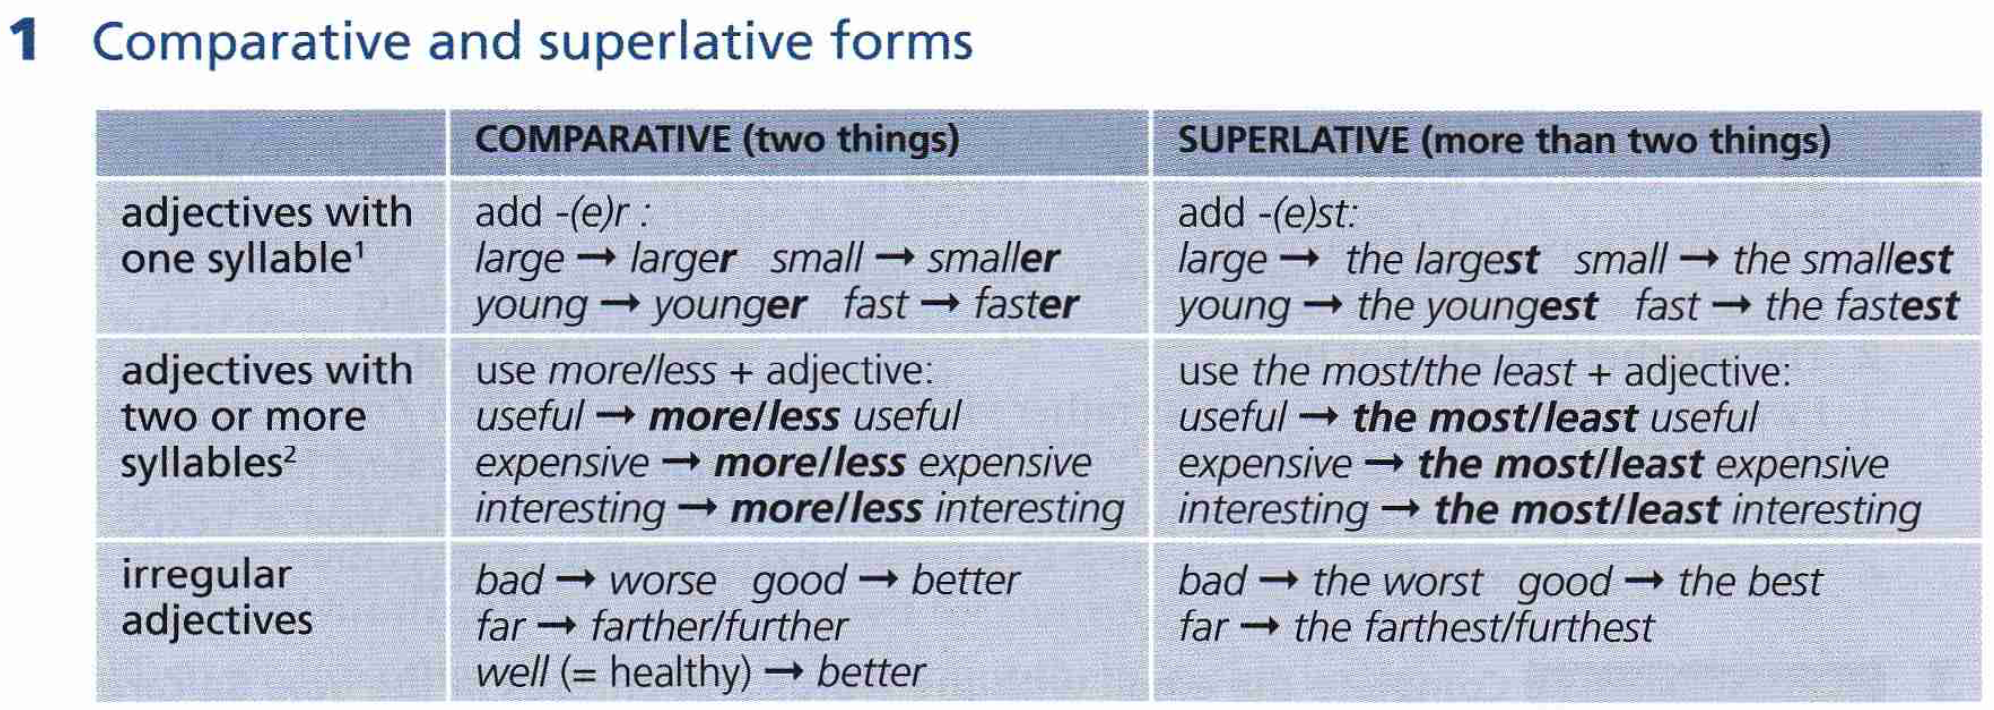 Much or many faster. Comparatives and Superlatives правило. Таблица Comparative and Superlative. Comparative and Superlative adjectives правило. Degrees of Comparison of adjectives таблица.